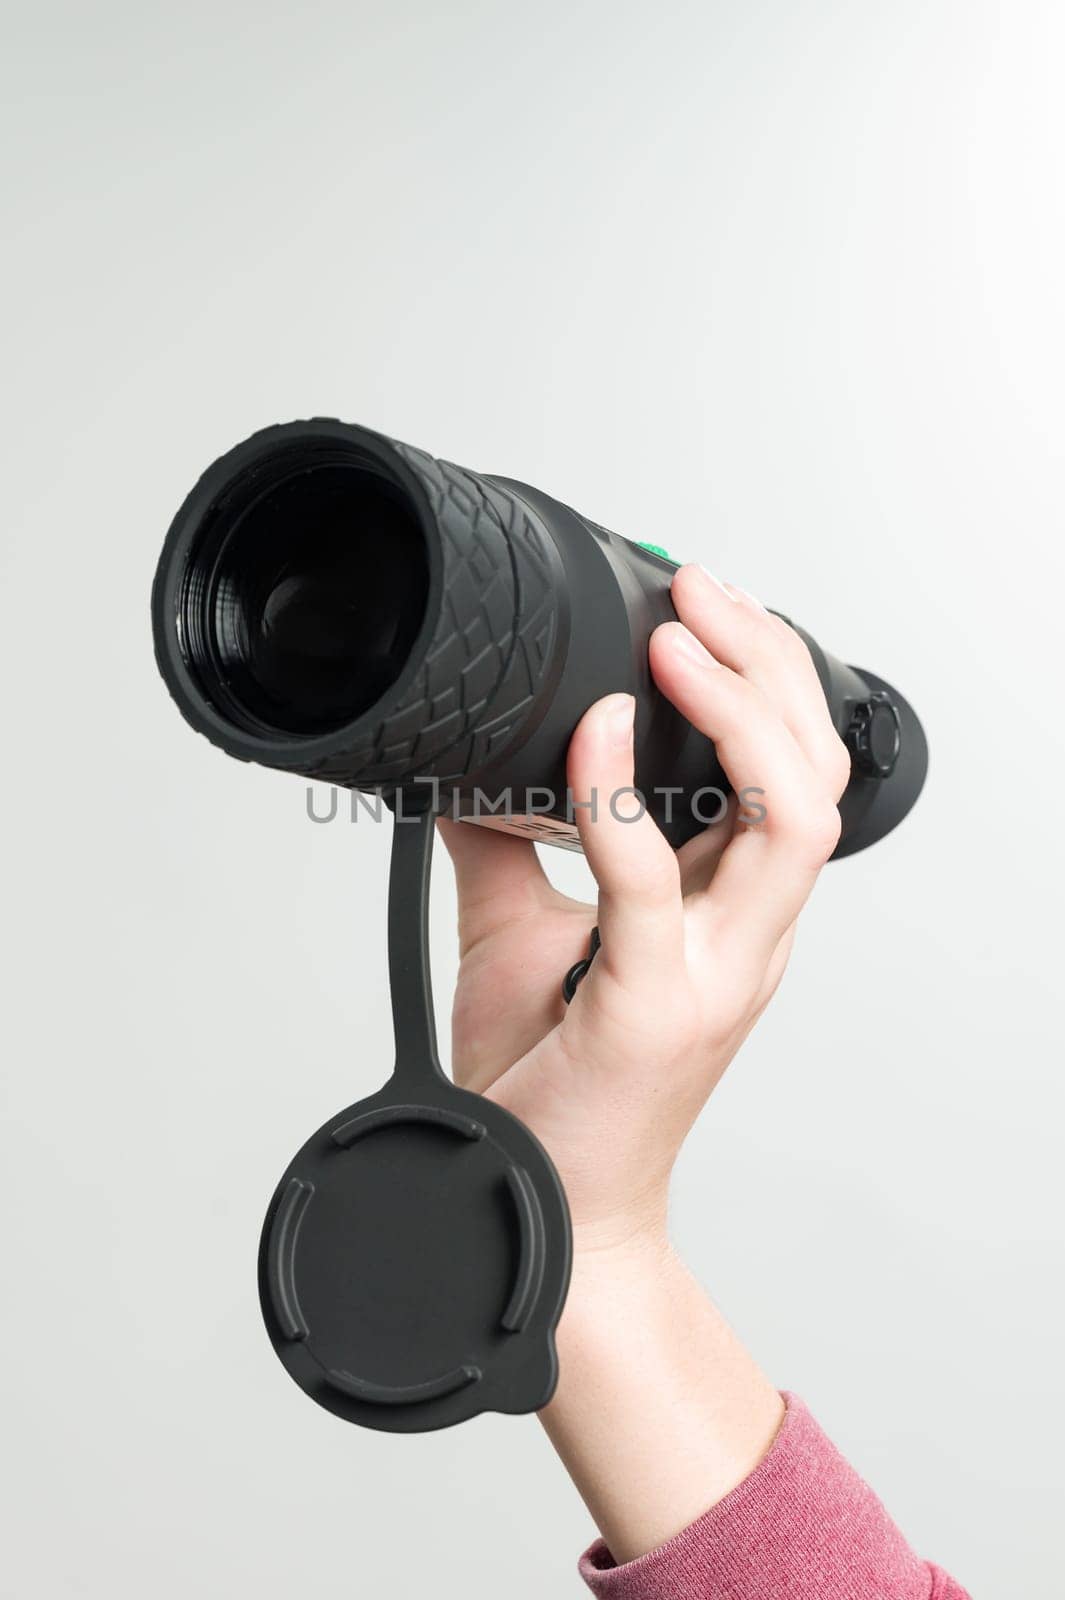 A child holds a monocular in his hand on a white background. by Niko_Cingaryuk